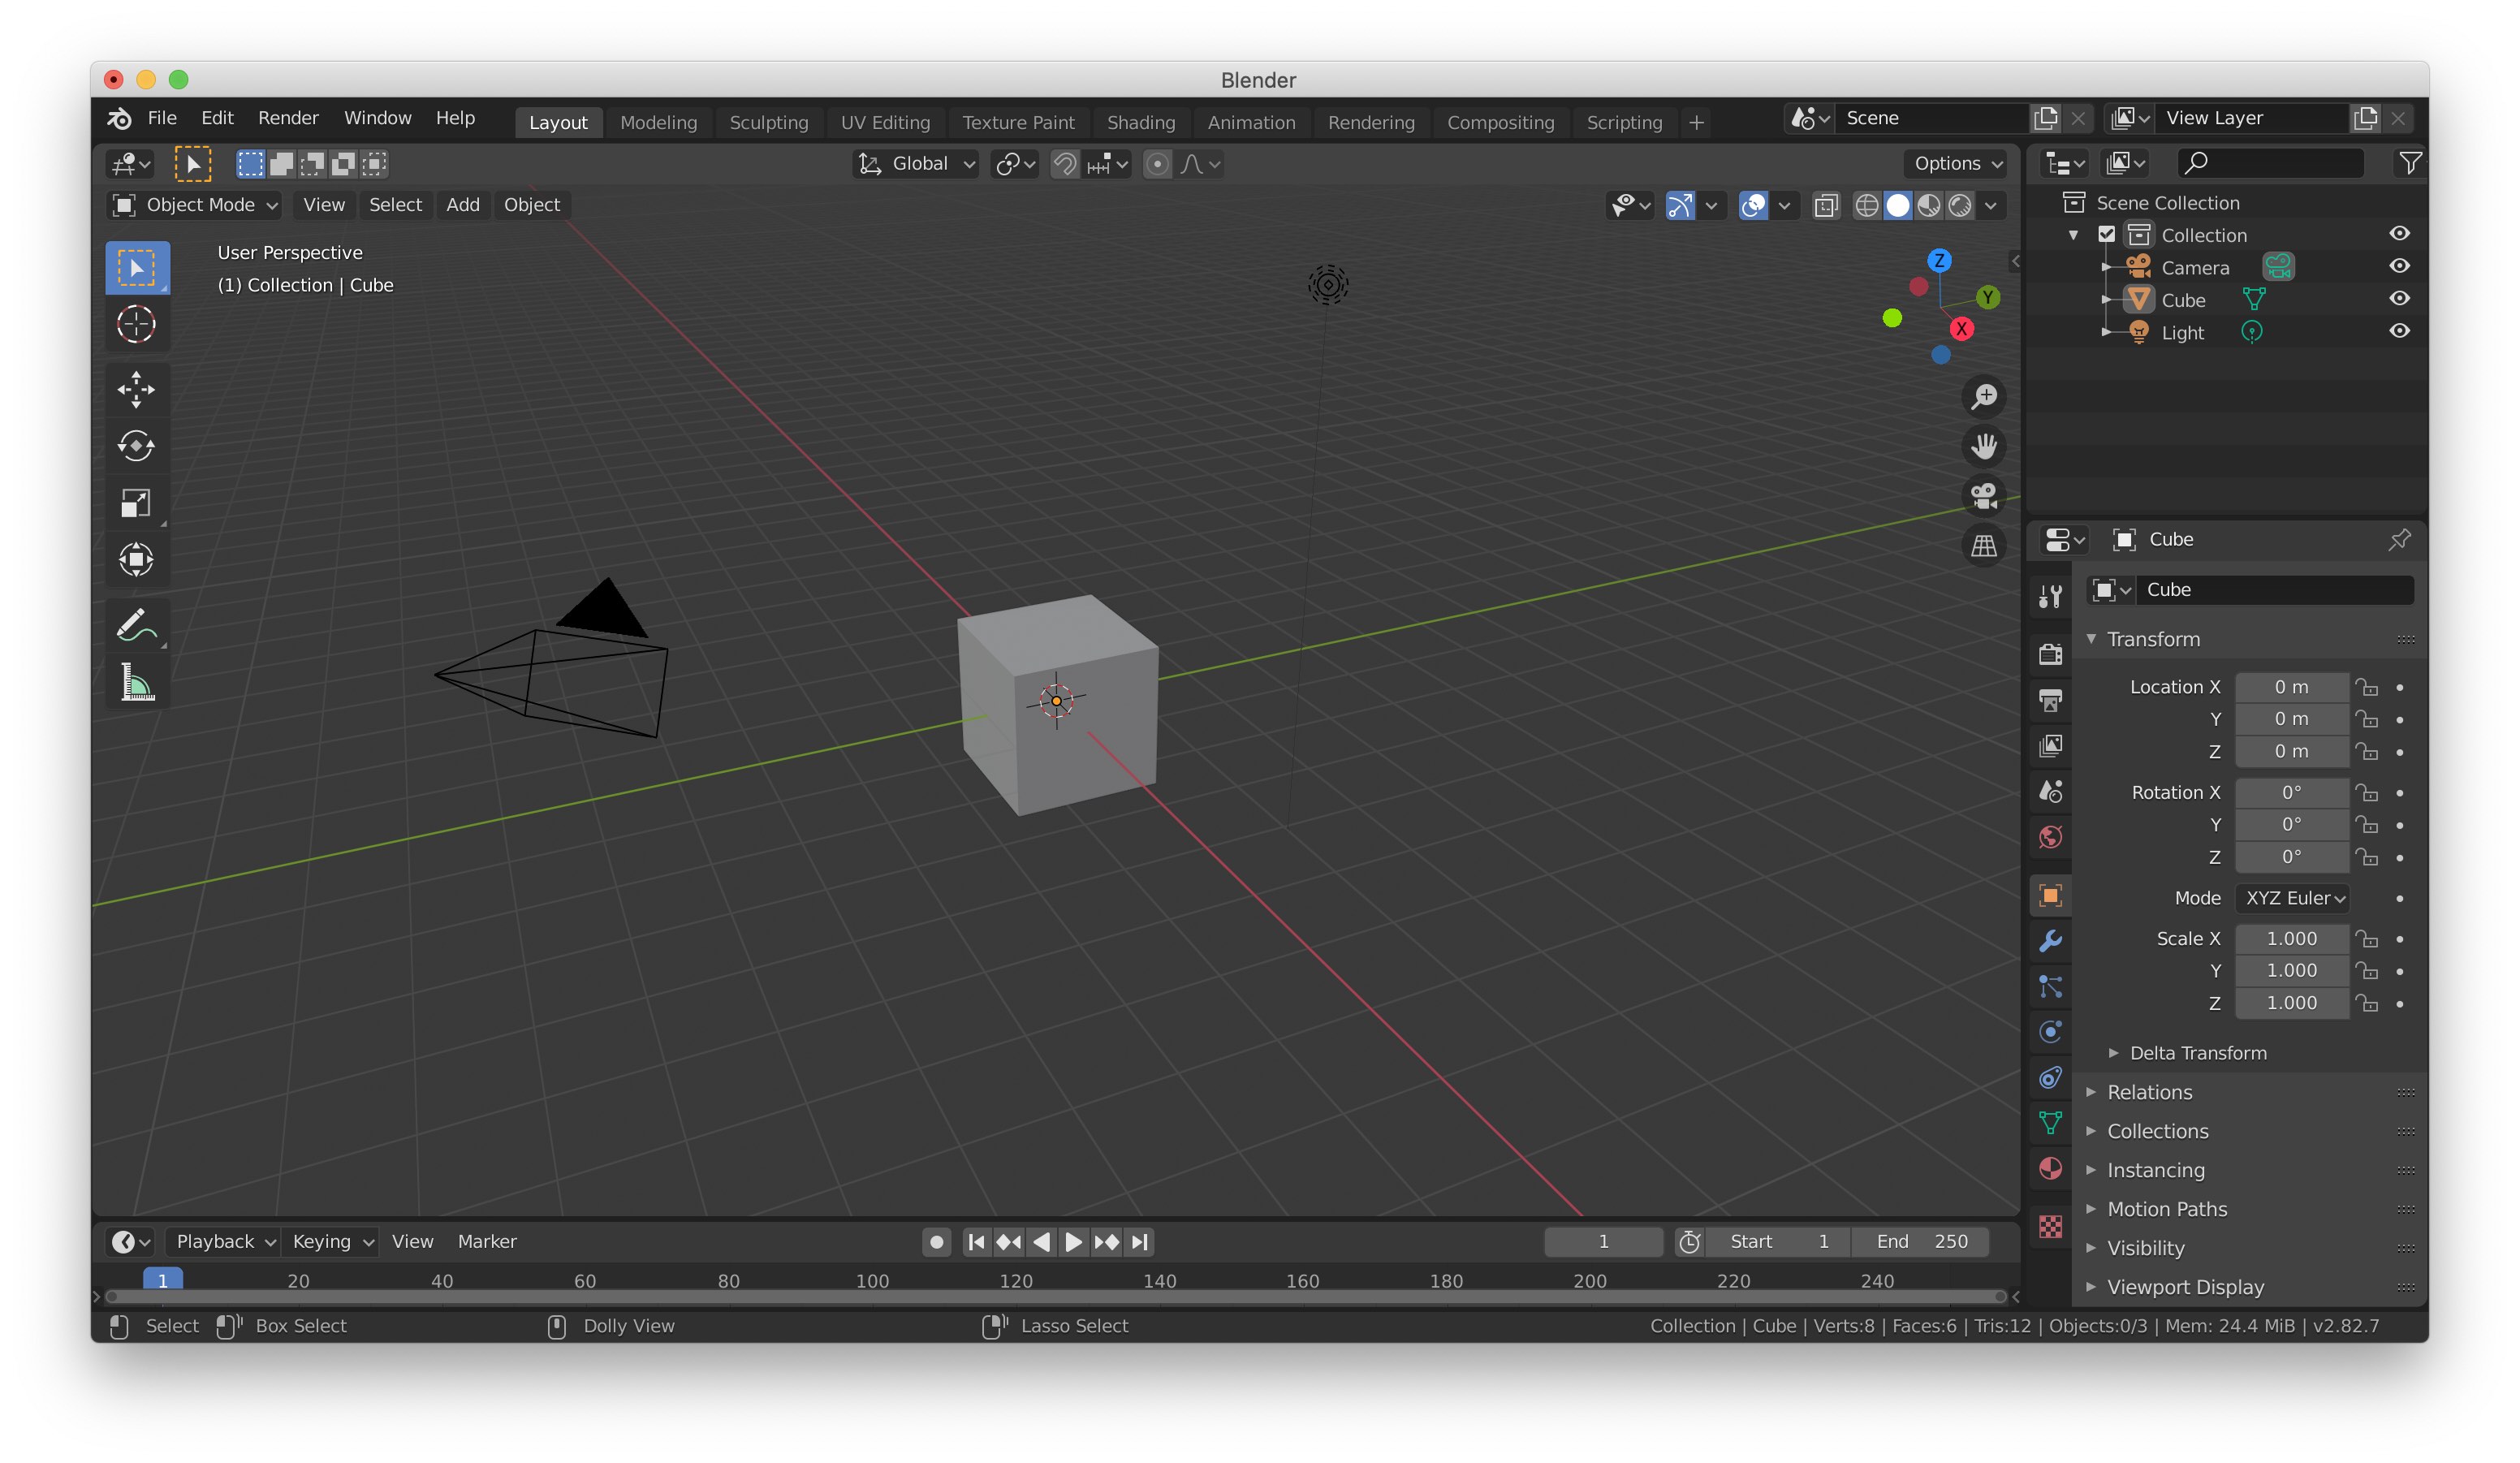 A default Blender scene fit with default cube, point light, and camera.